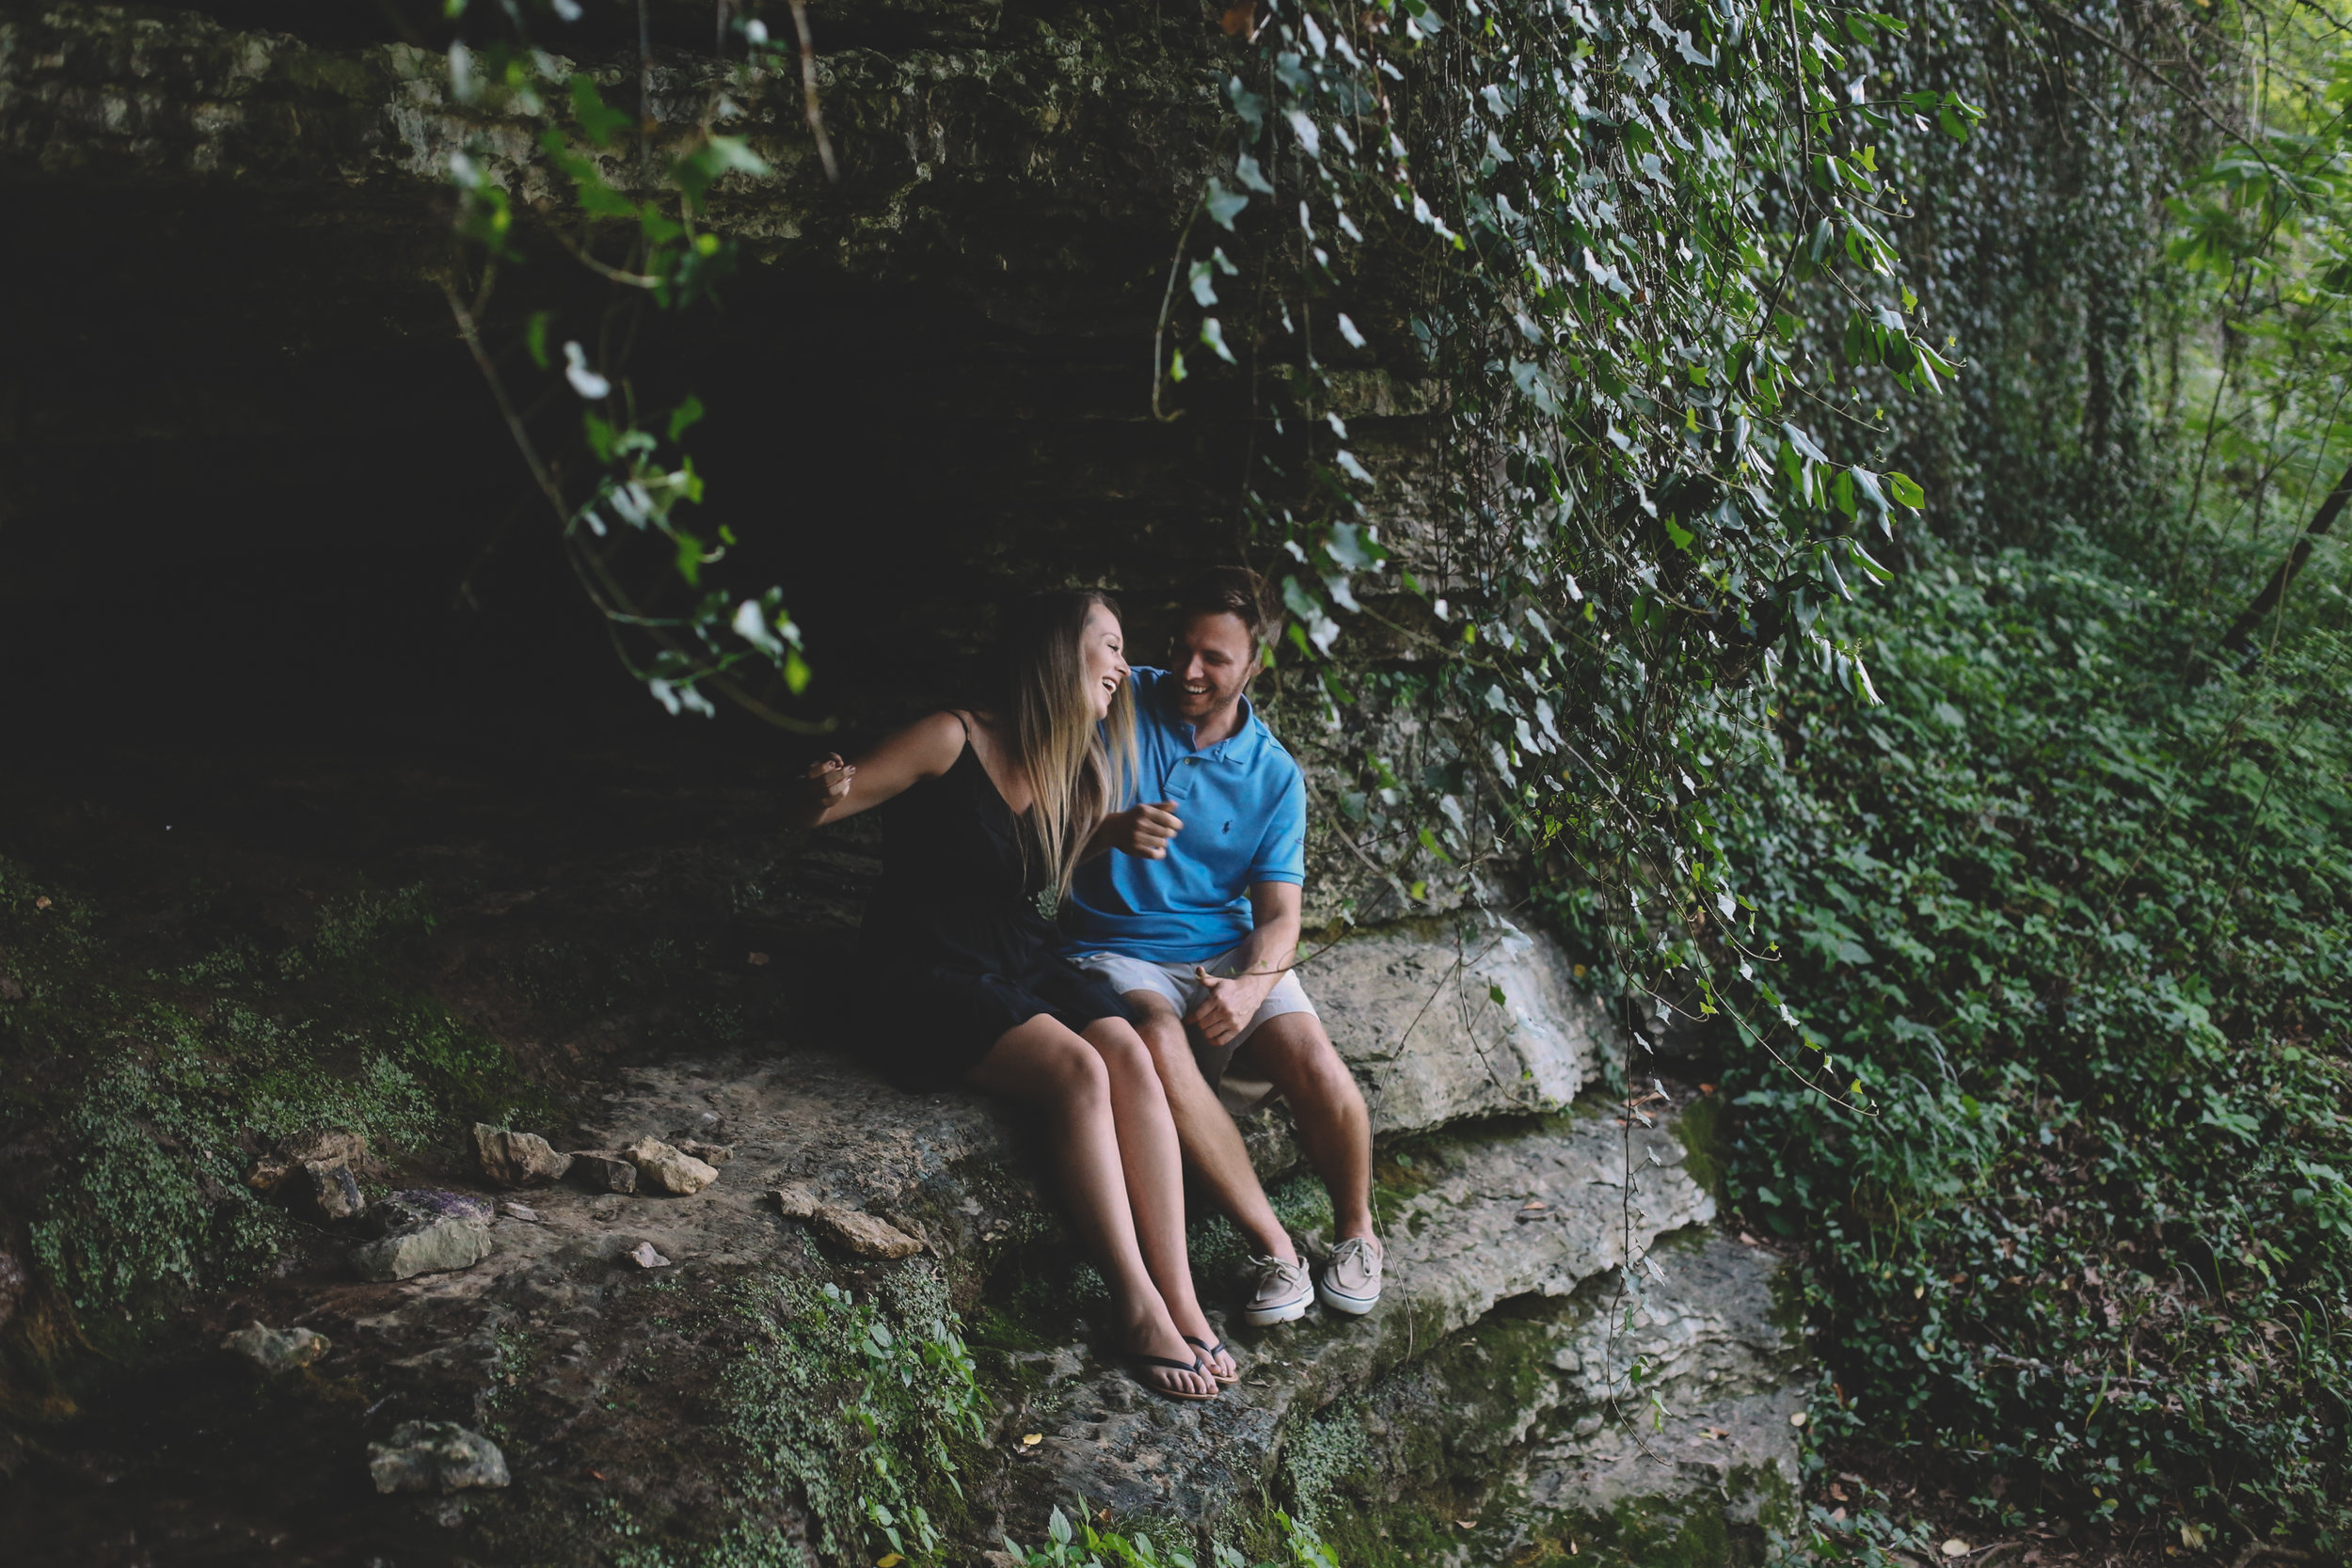 Elizabeth + Mitch Engagement Photo Session - Cherokee Park - Louisville, KY - Again We Say Rejoice Photography (44 of 173).jpg